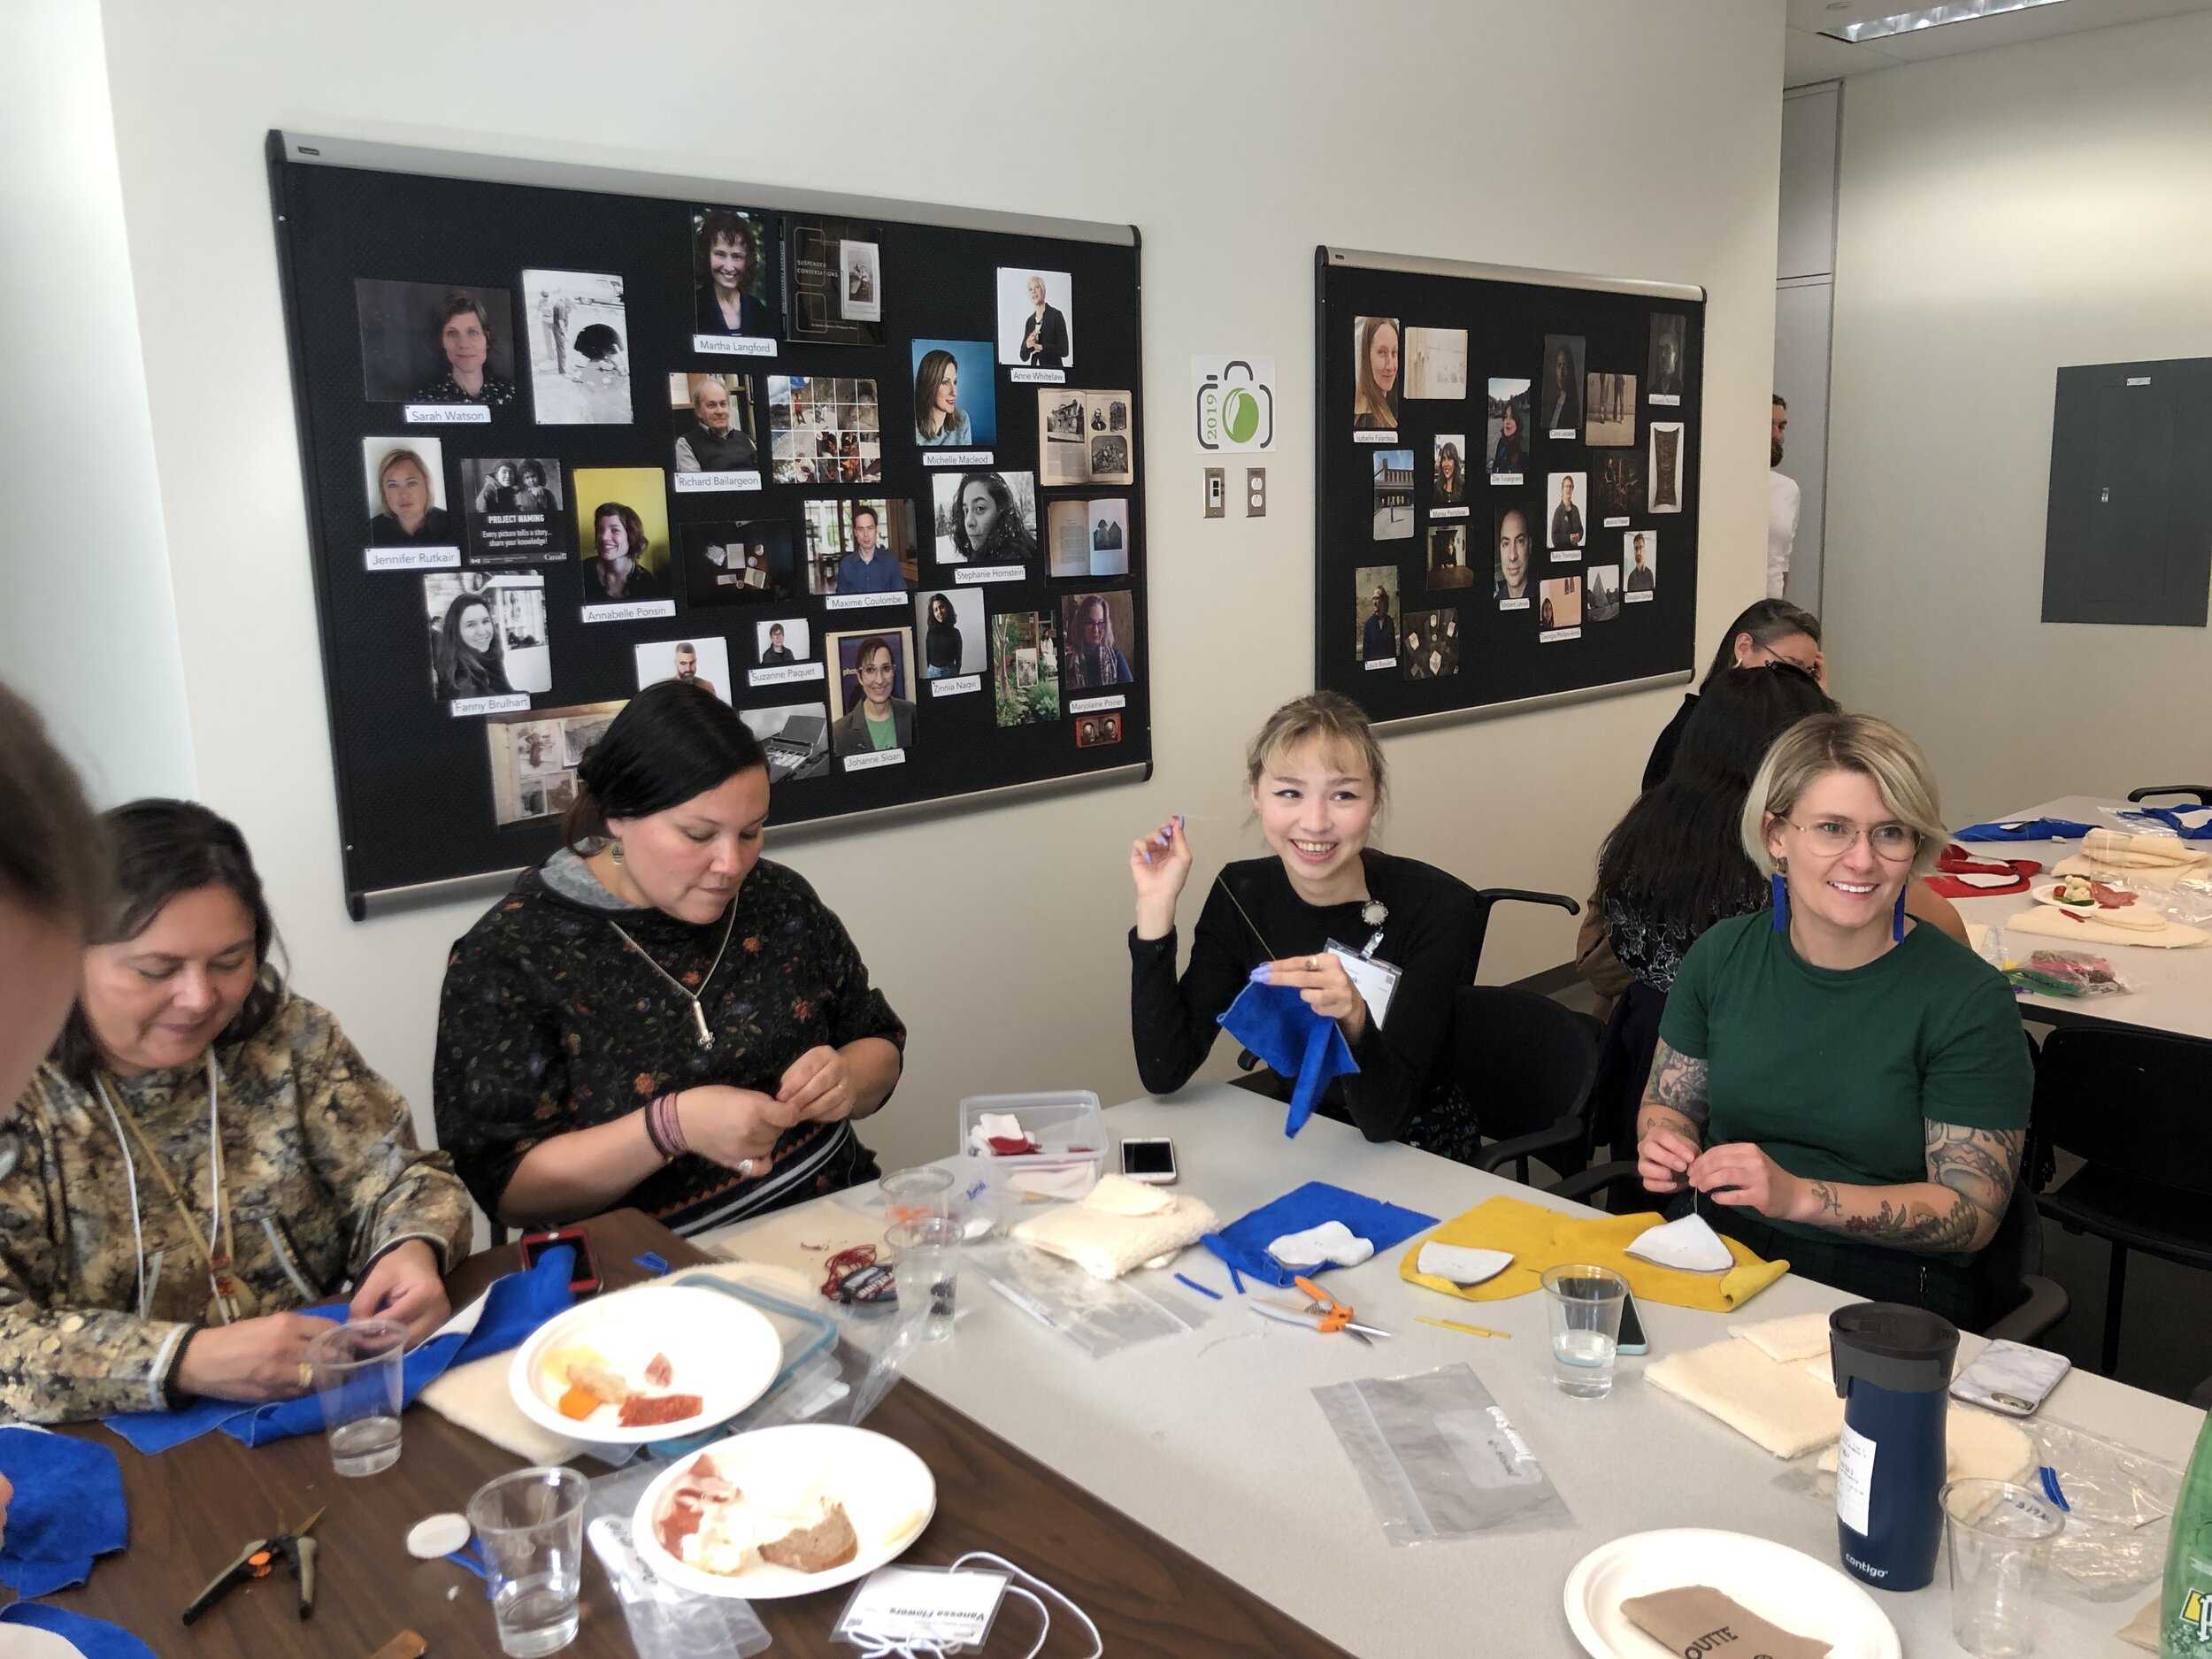  Taqralik Partridge, Megan Kyak-Monteith, and Danielle Aimée Miles taking part in the Labrador Inuit Slipper Making Workshop, led by Veronica Flowers and Vanessa Flowers. This session was held at Concordia University, Montreal QC, October 2019. Photo